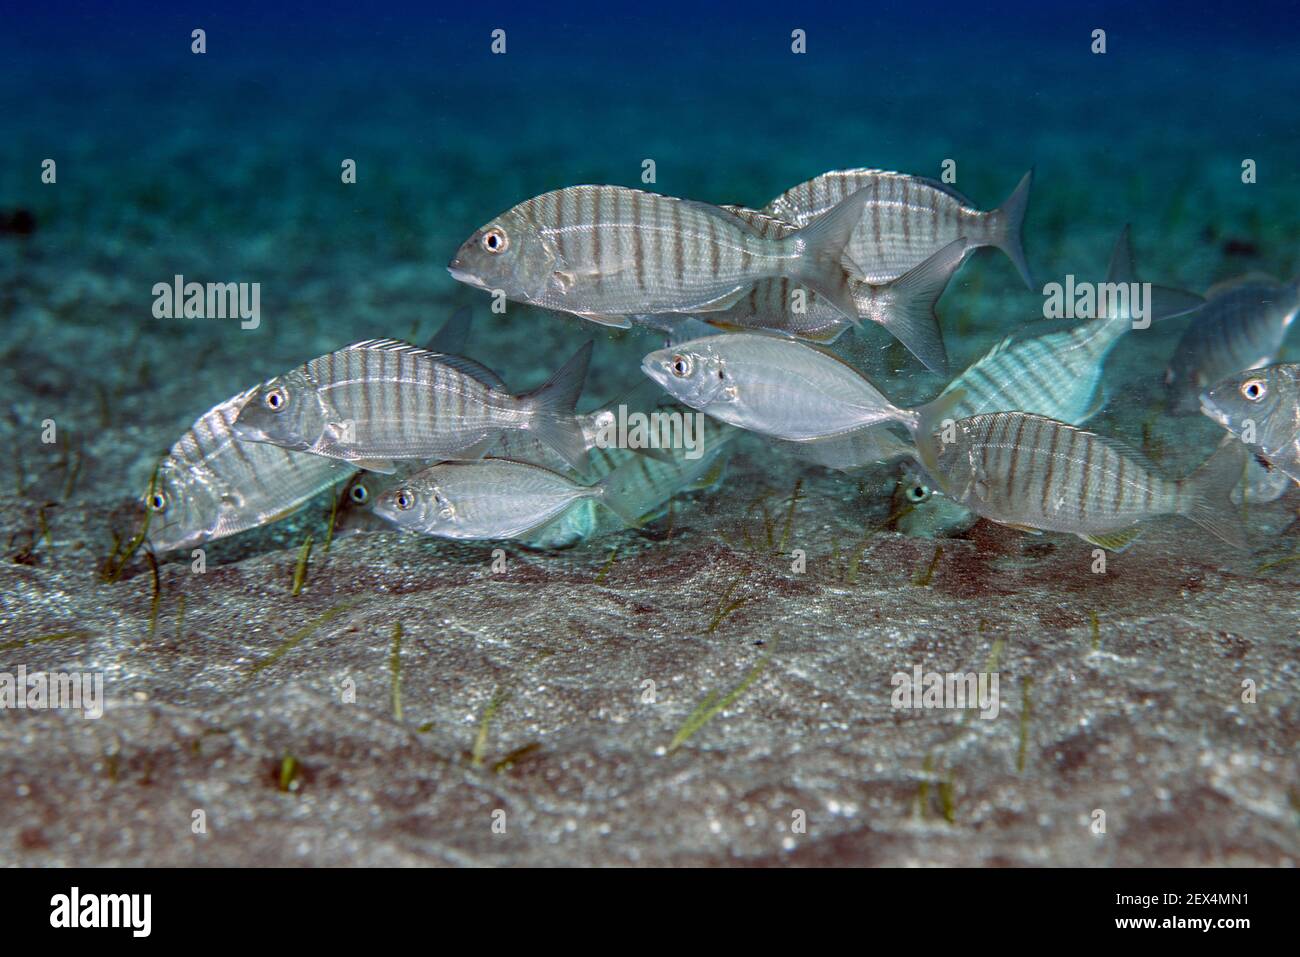 Striped seabream (Lithognathus mormyrus). Fish of the Canary Islands, Tenerife. Stock Photo